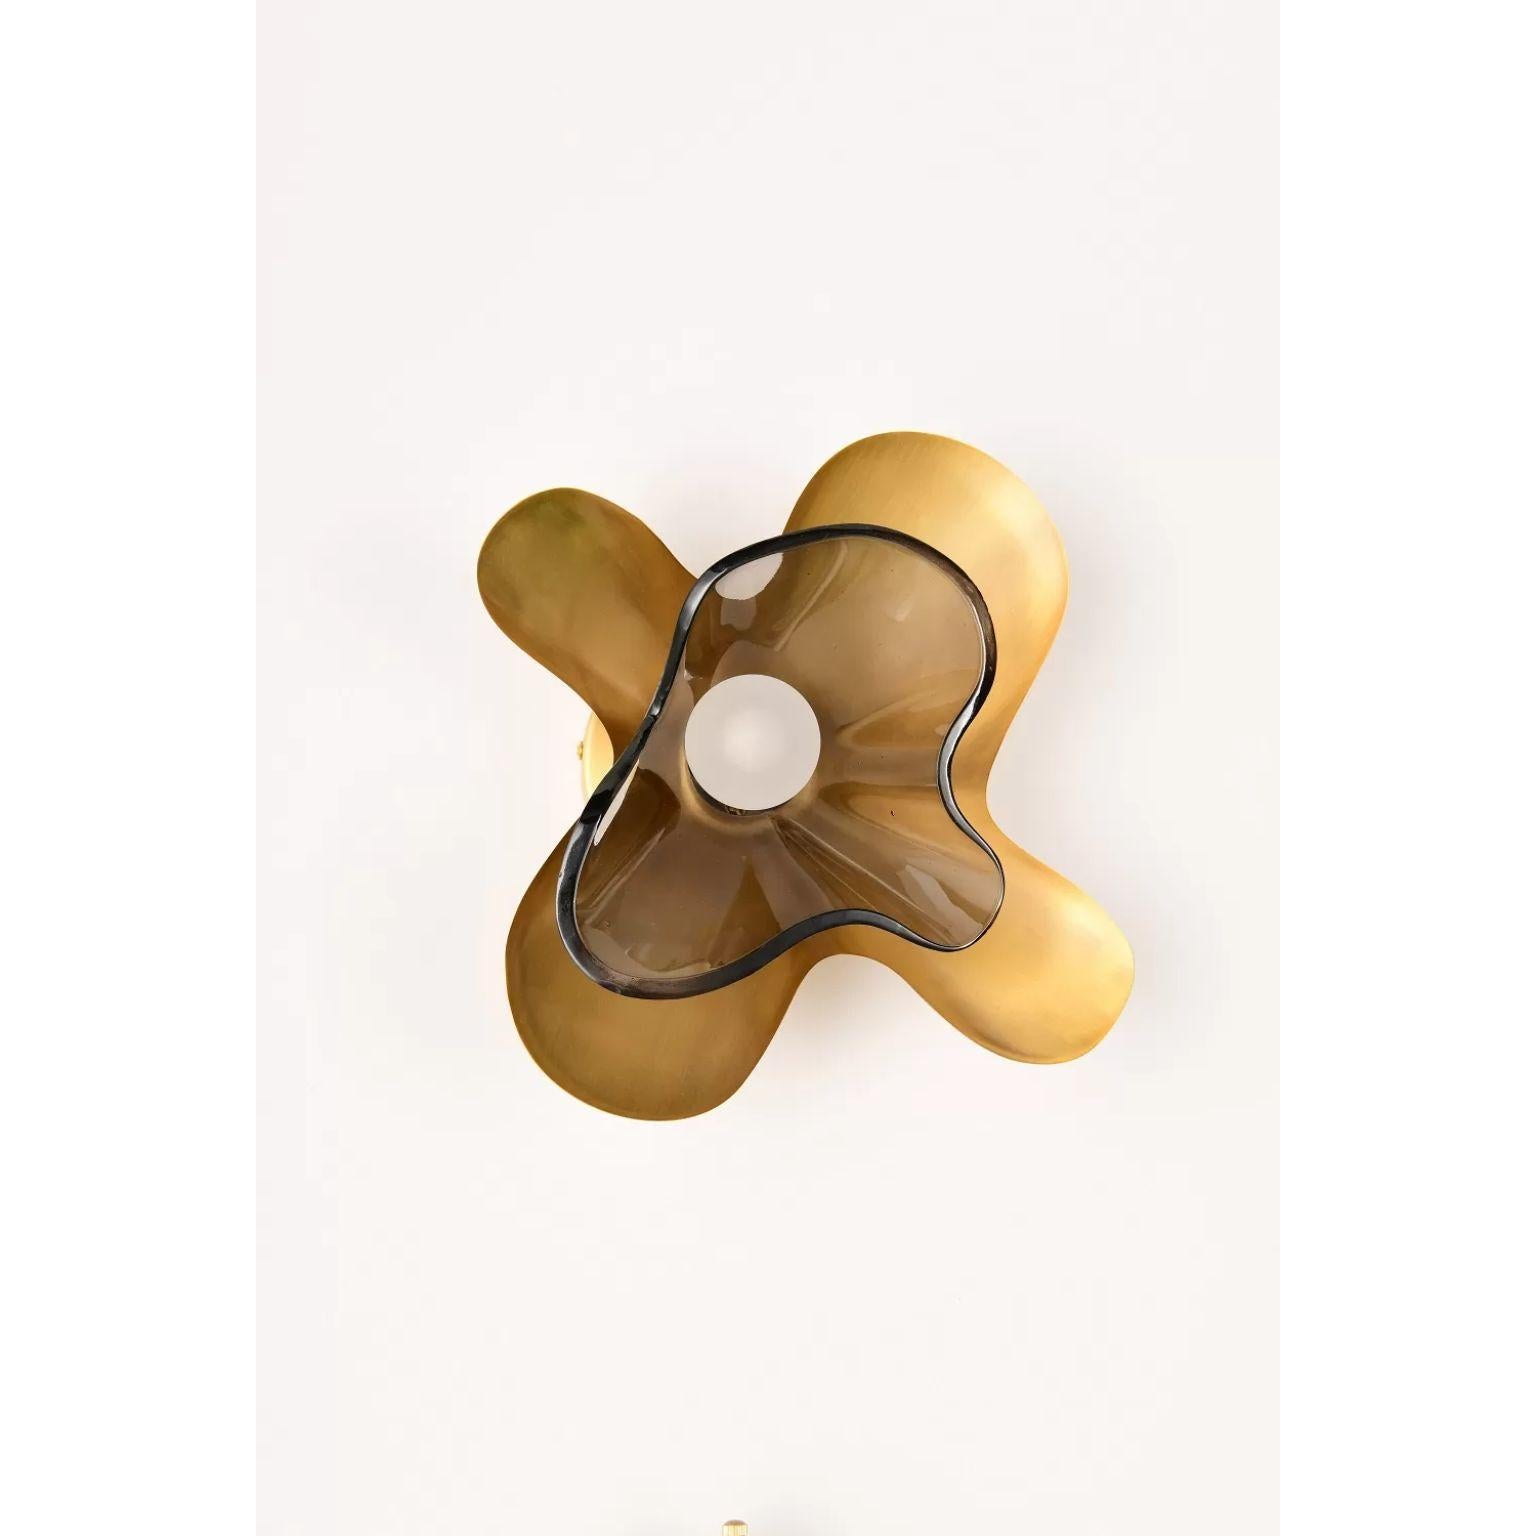 Grey Butterfly Wall Sconce by Dainte
Dimensions: D 13.5 x W 28.5 x H 28 cm.
Materials: Glass and brass. 

The Butterfly wall sconce features an elegant silhouette modeled after the wings of a butterfly in motion. Layered textured brass and glass, a